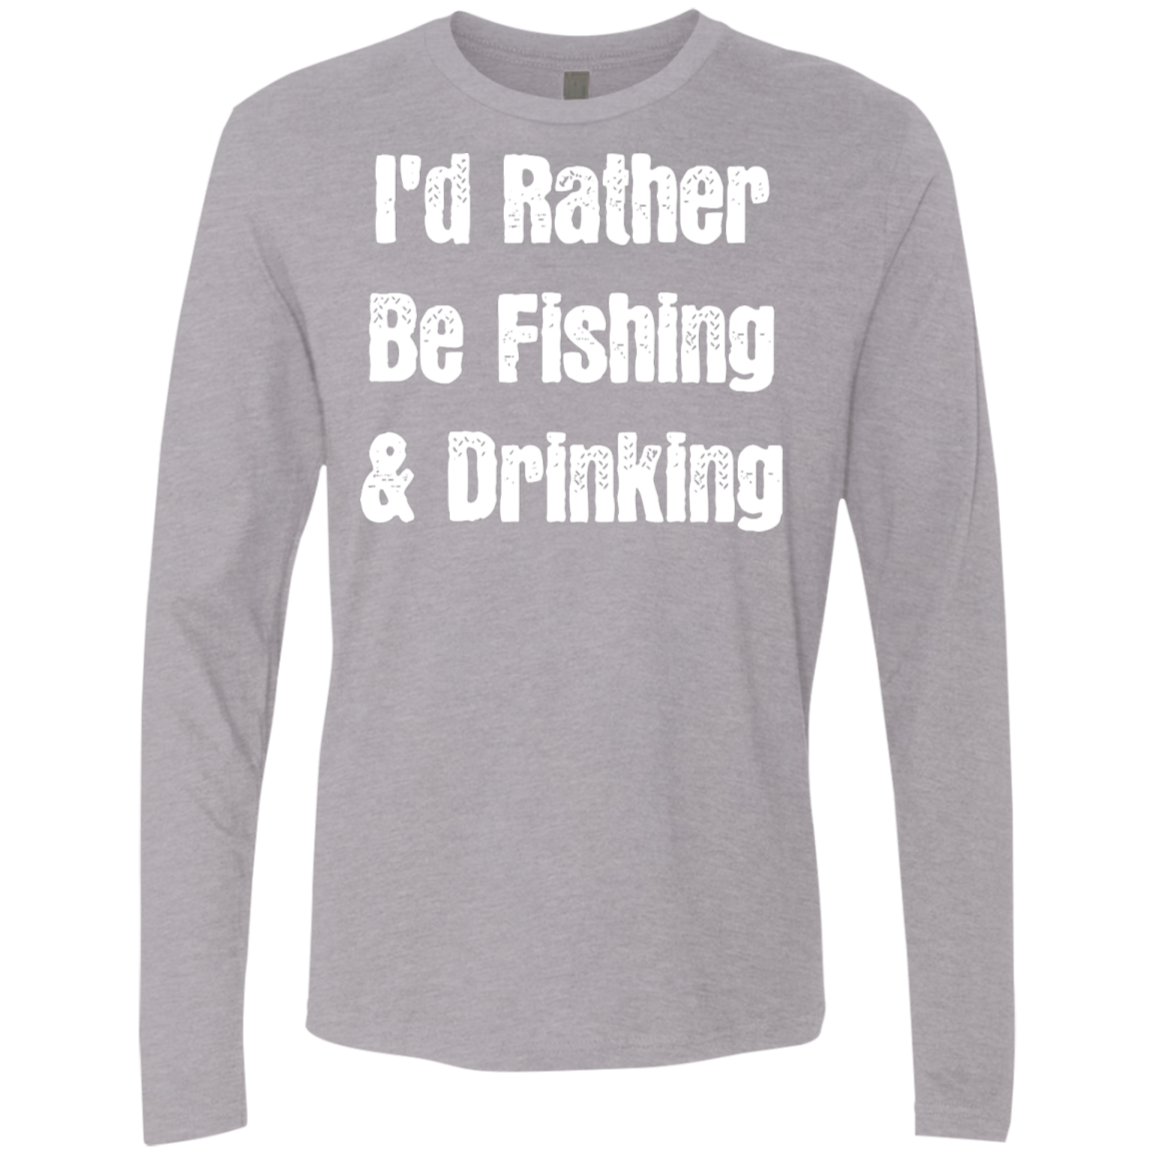 I'd Rather Be Fishing & Drinking T-Shirt Apparel - The Beer Lodge